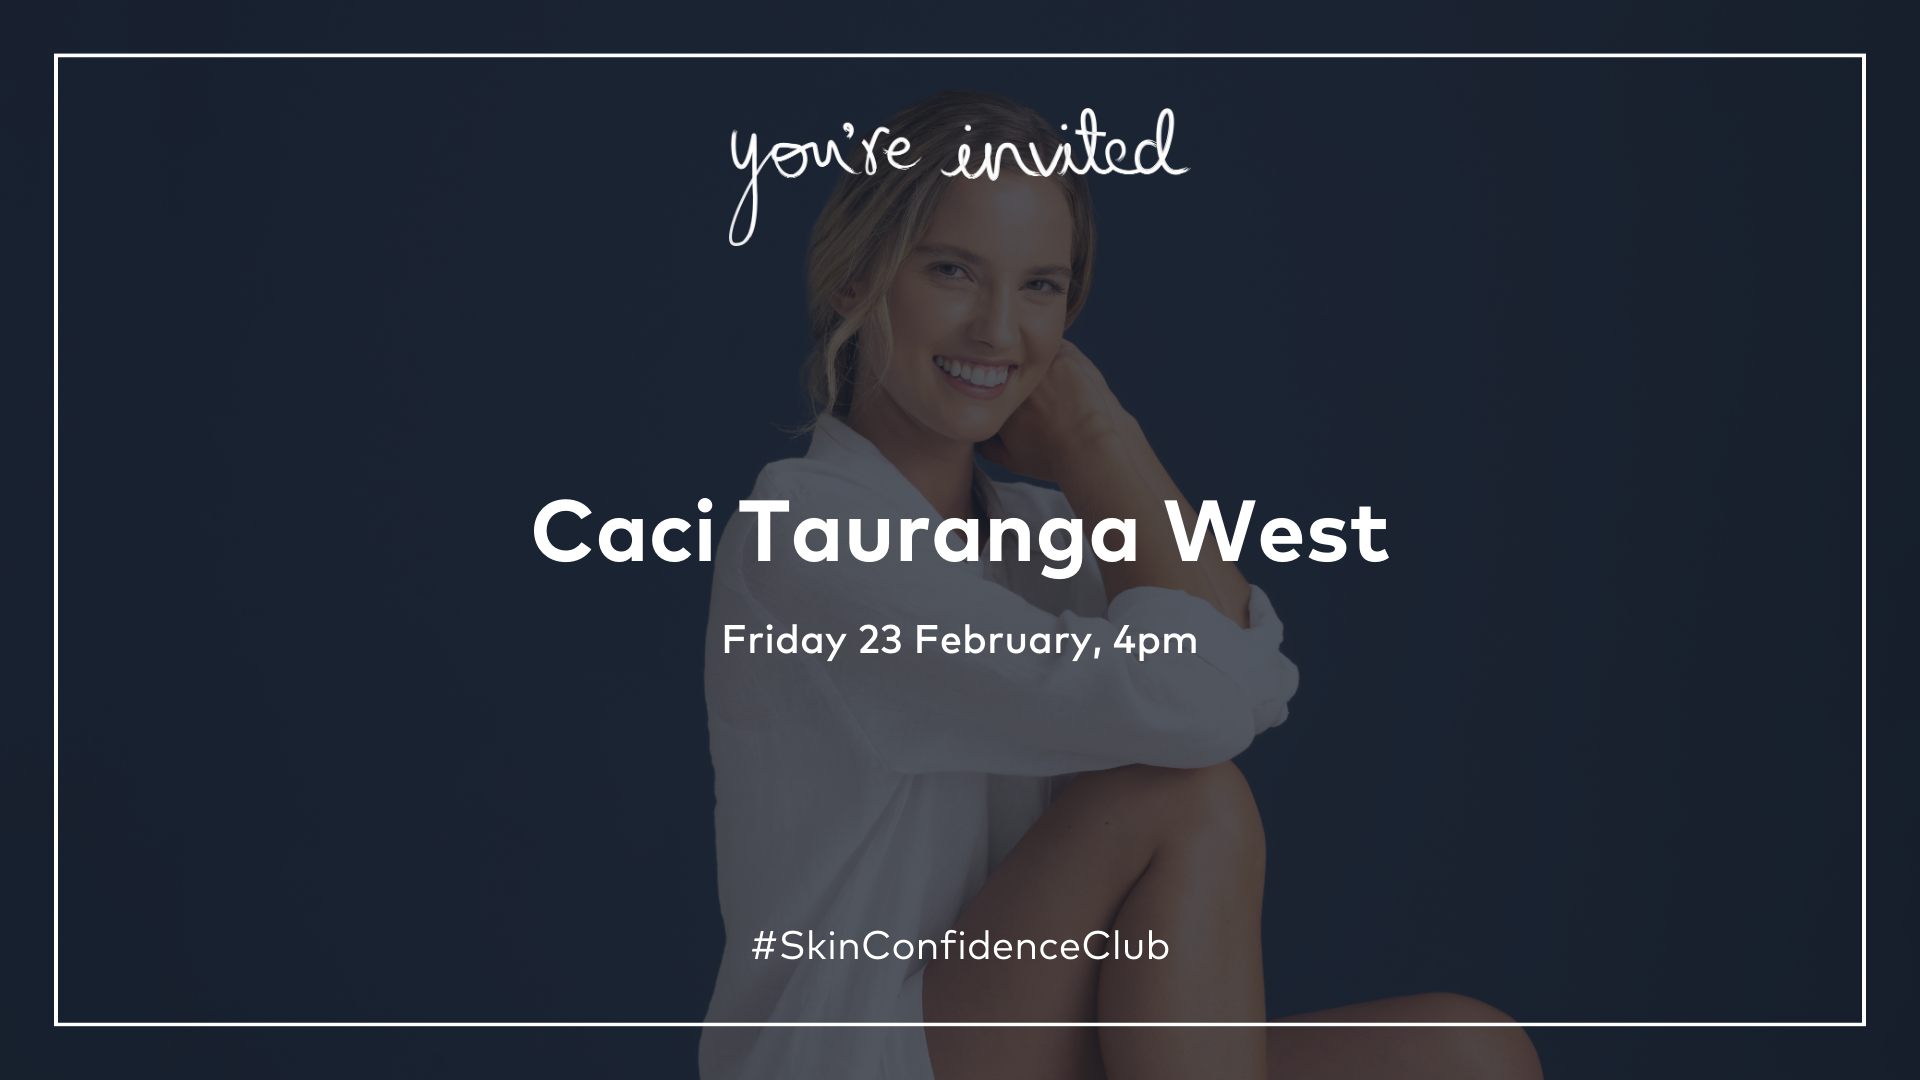 Be in the Know and Glow with Caci Tauranga West!